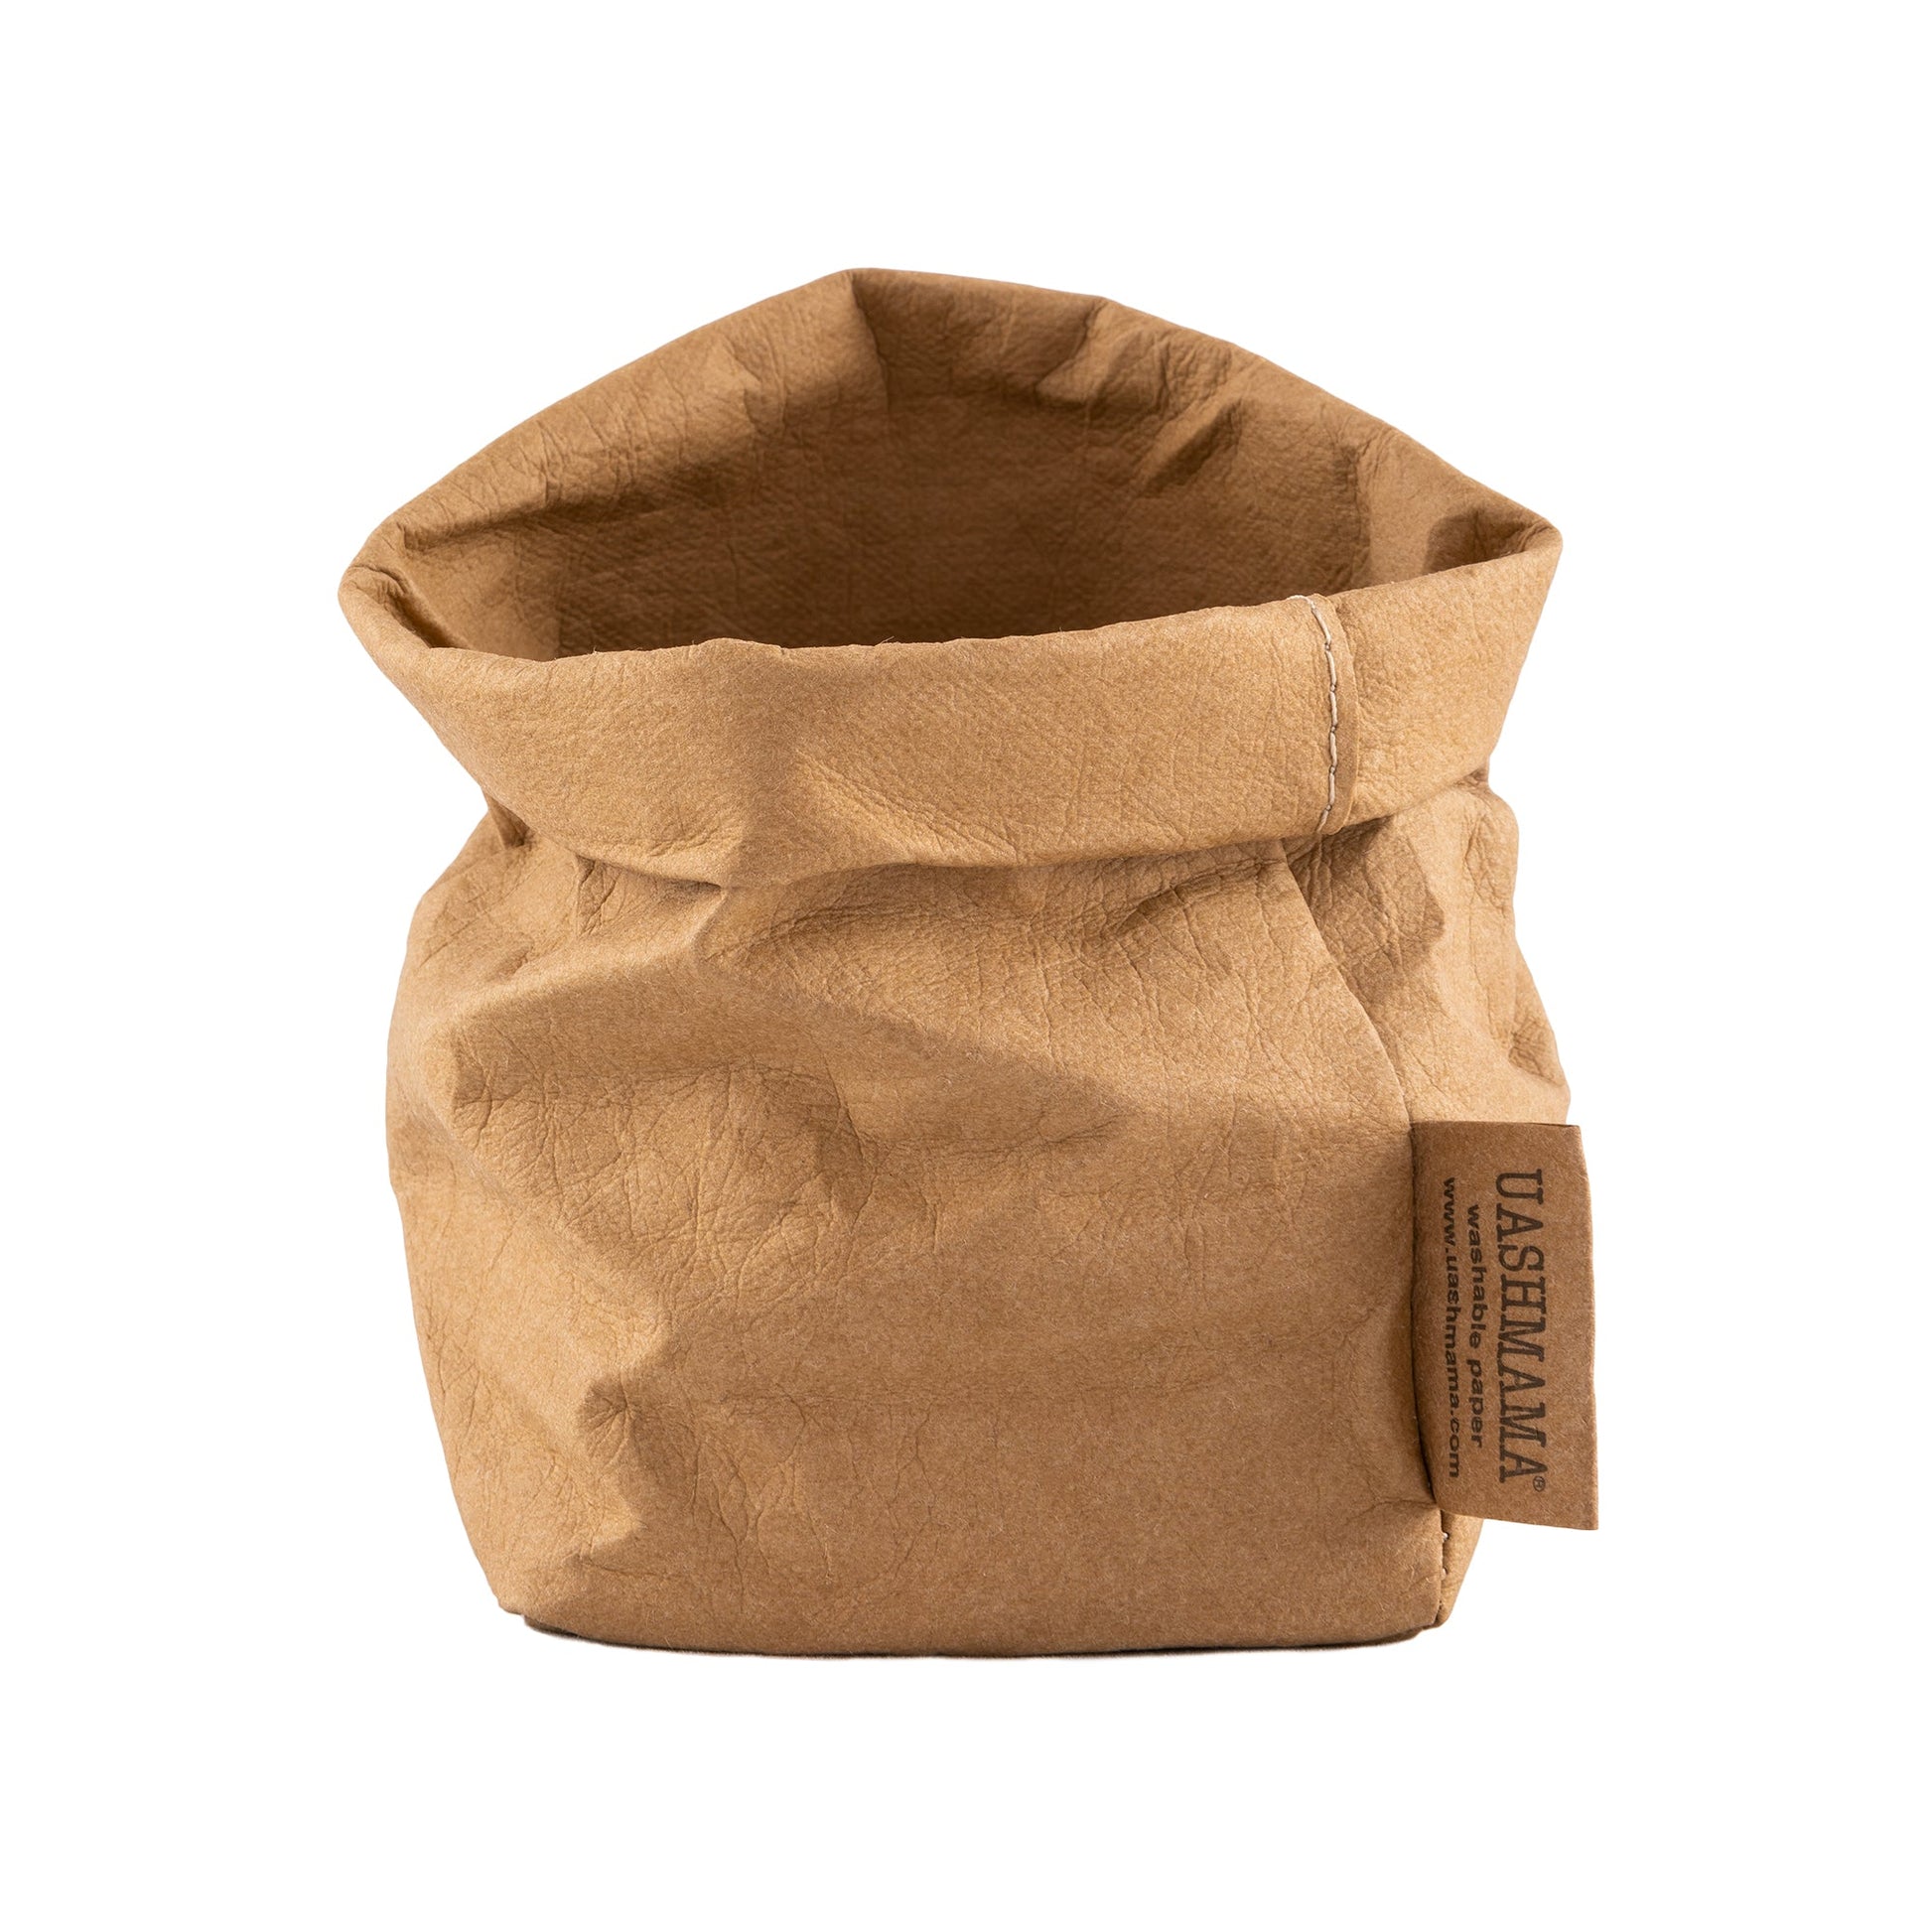 A washable paper bag is shown. The bag is rolled down at the top and features a UASHMAMA logo label on the bottom left corner. The bag pictured is the piccolo size in tan.